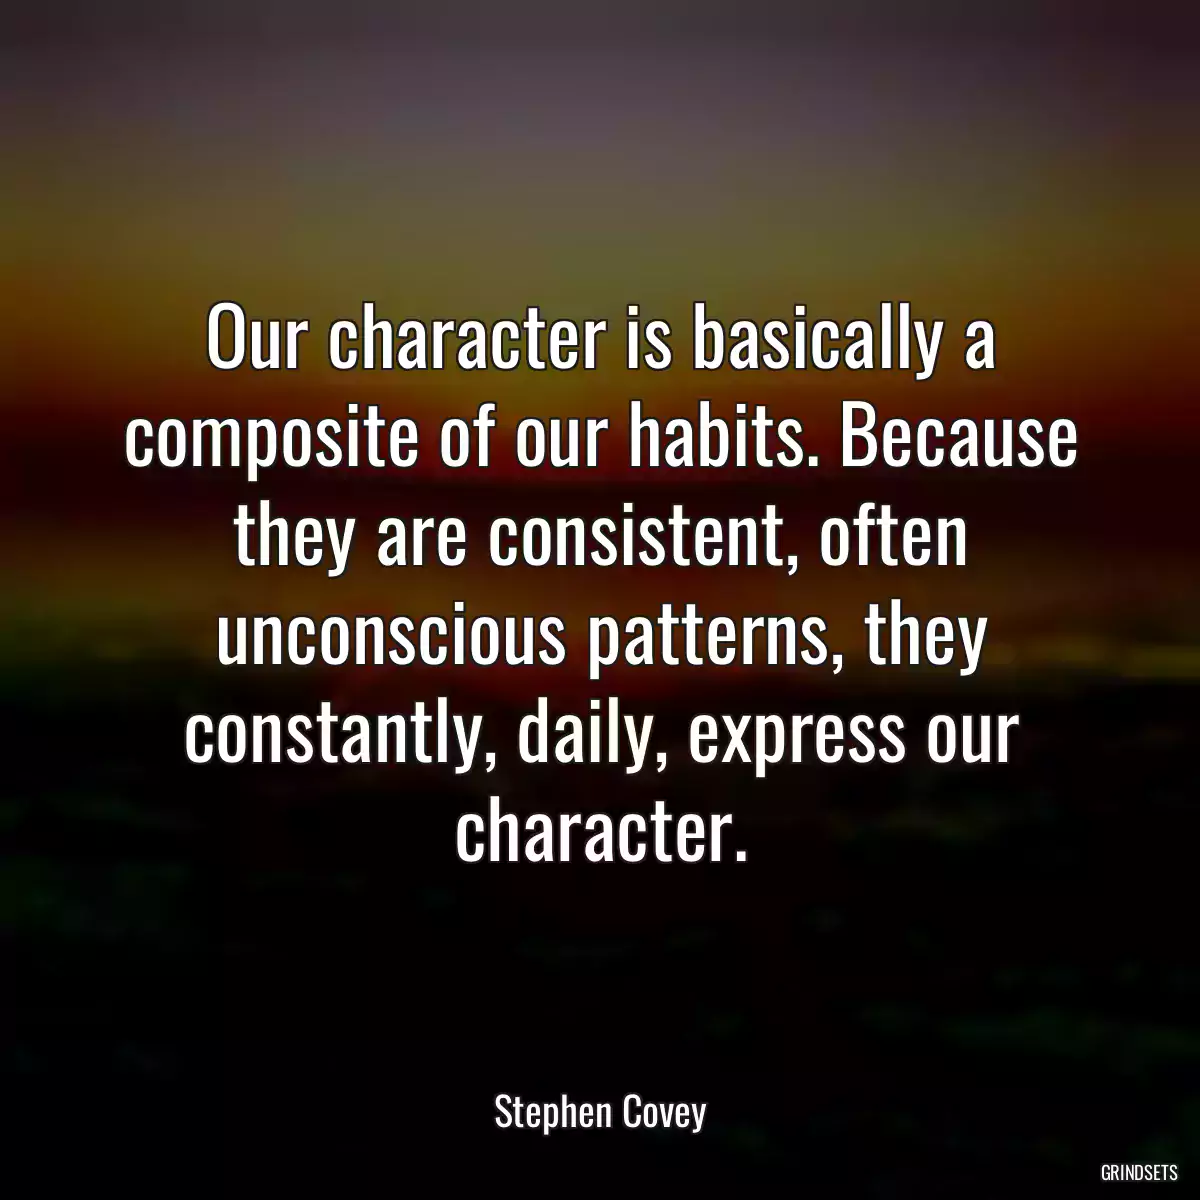 Our character is basically a composite of our habits. Because they are consistent, often unconscious patterns, they constantly, daily, express our character.